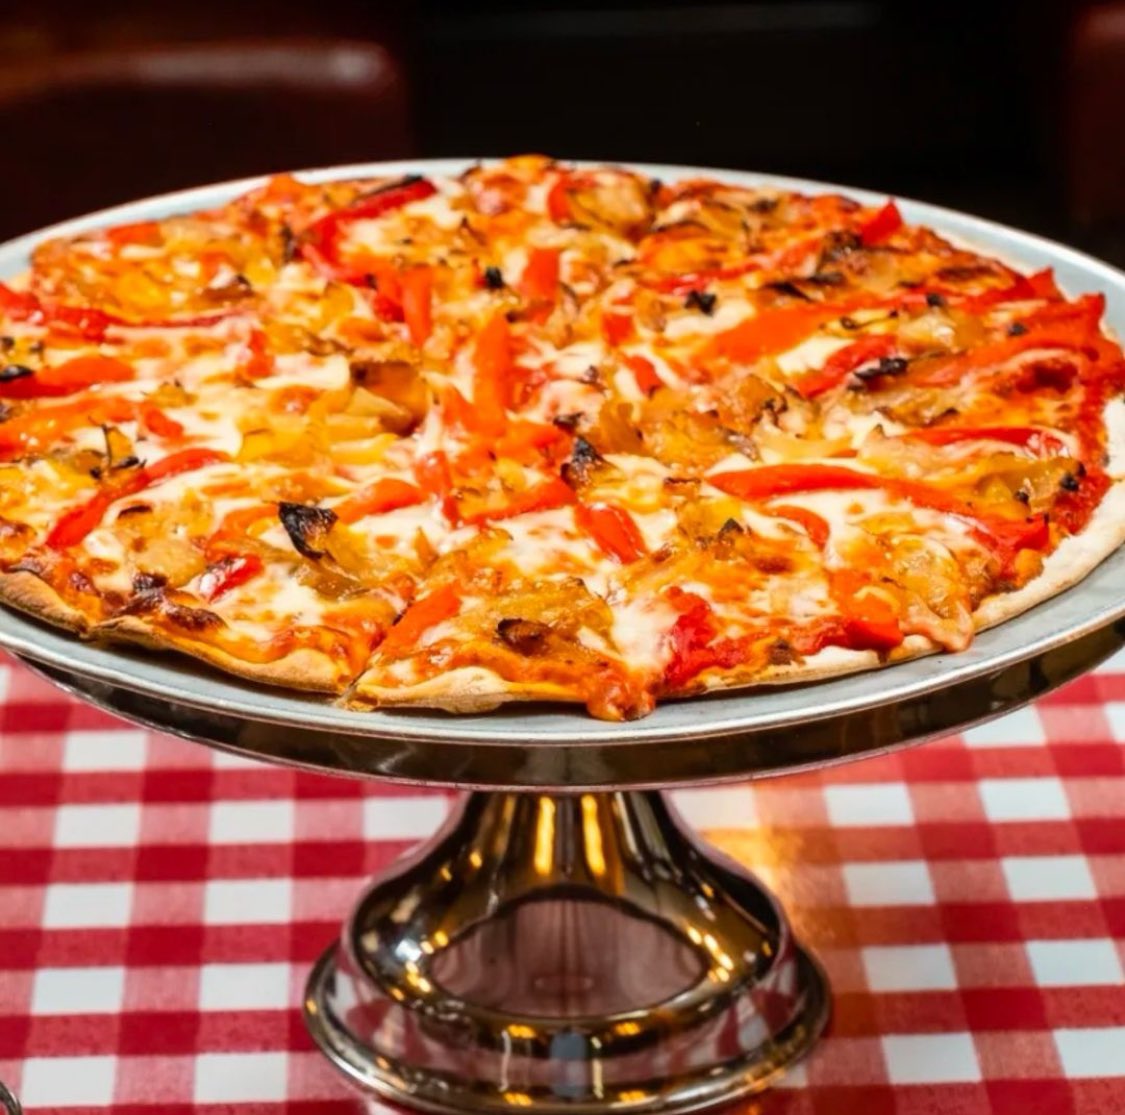 Who among you can resist the temptation of our renowned ultra-thin crust pizza? Share your favorite toppings with us in the comments below. Let's find out which topping will win. #KinchleysTavern #KinchleysNJ